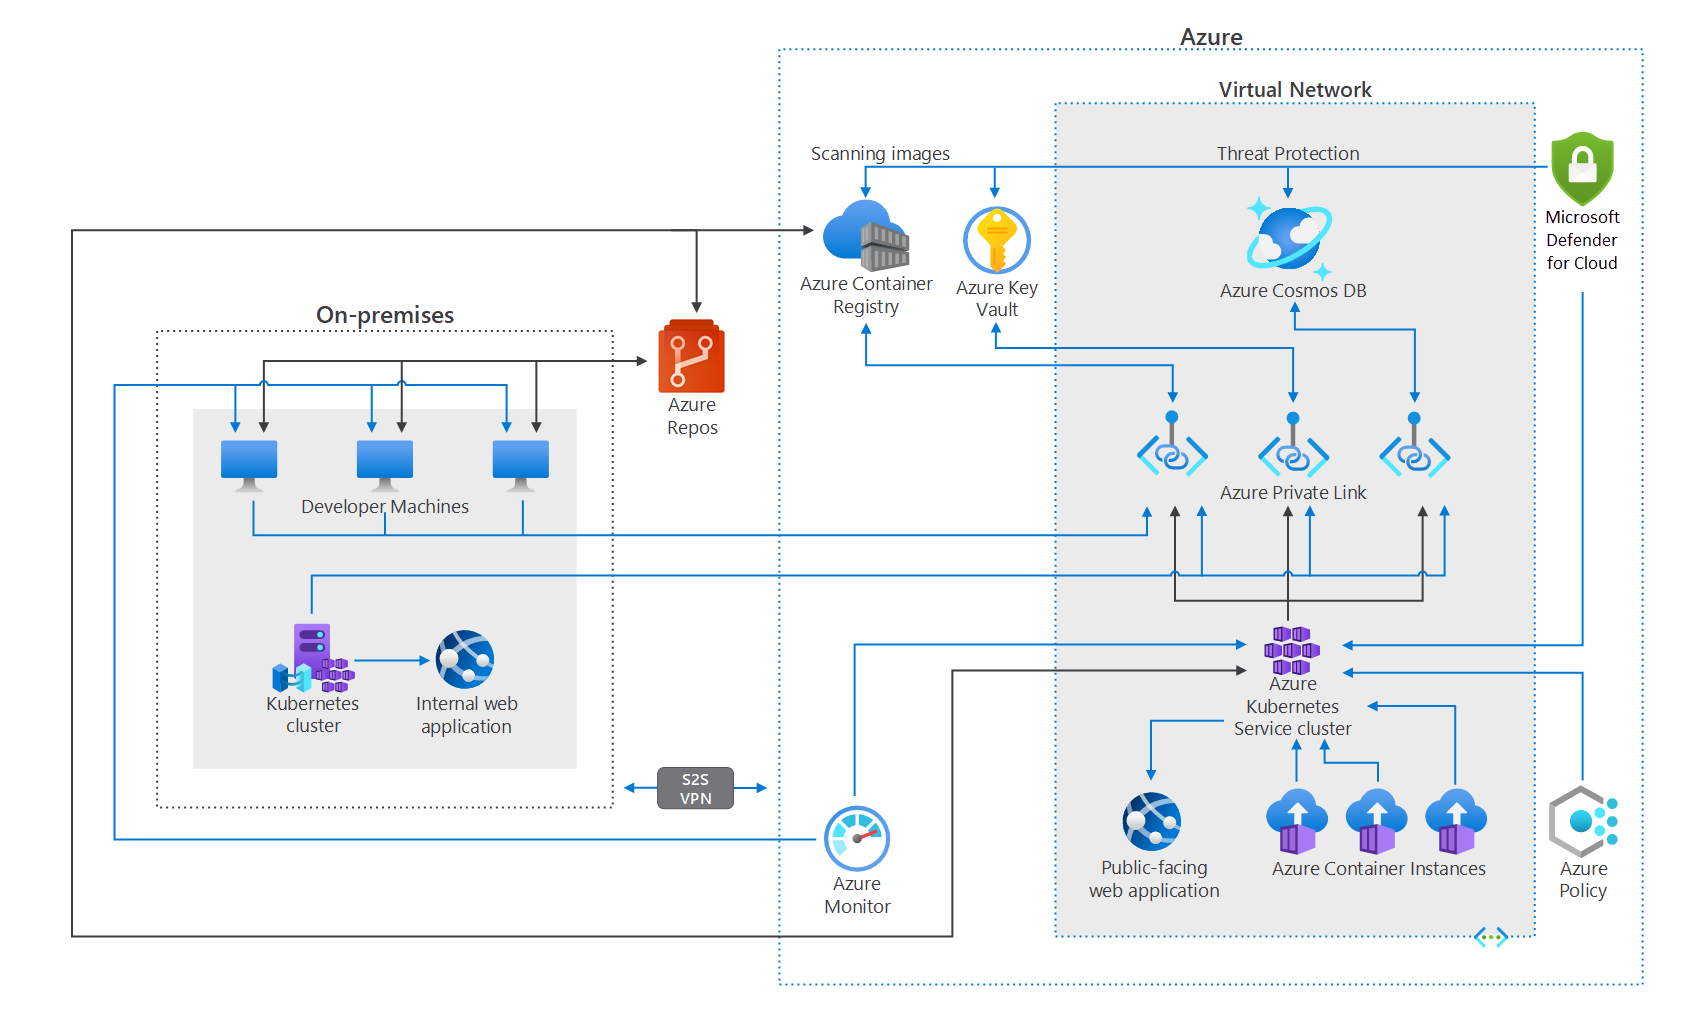 The diagram illustrates a developer team that deploys its container images to a Microsoft Azure Container Registry. Subsequently, the container images are pulled and deployed to either an on-premises or cloud-based Kubernetes cluster. The containers are monitored using Azure Monitor and the container images are scanned and monitored using Azure Container Registry.